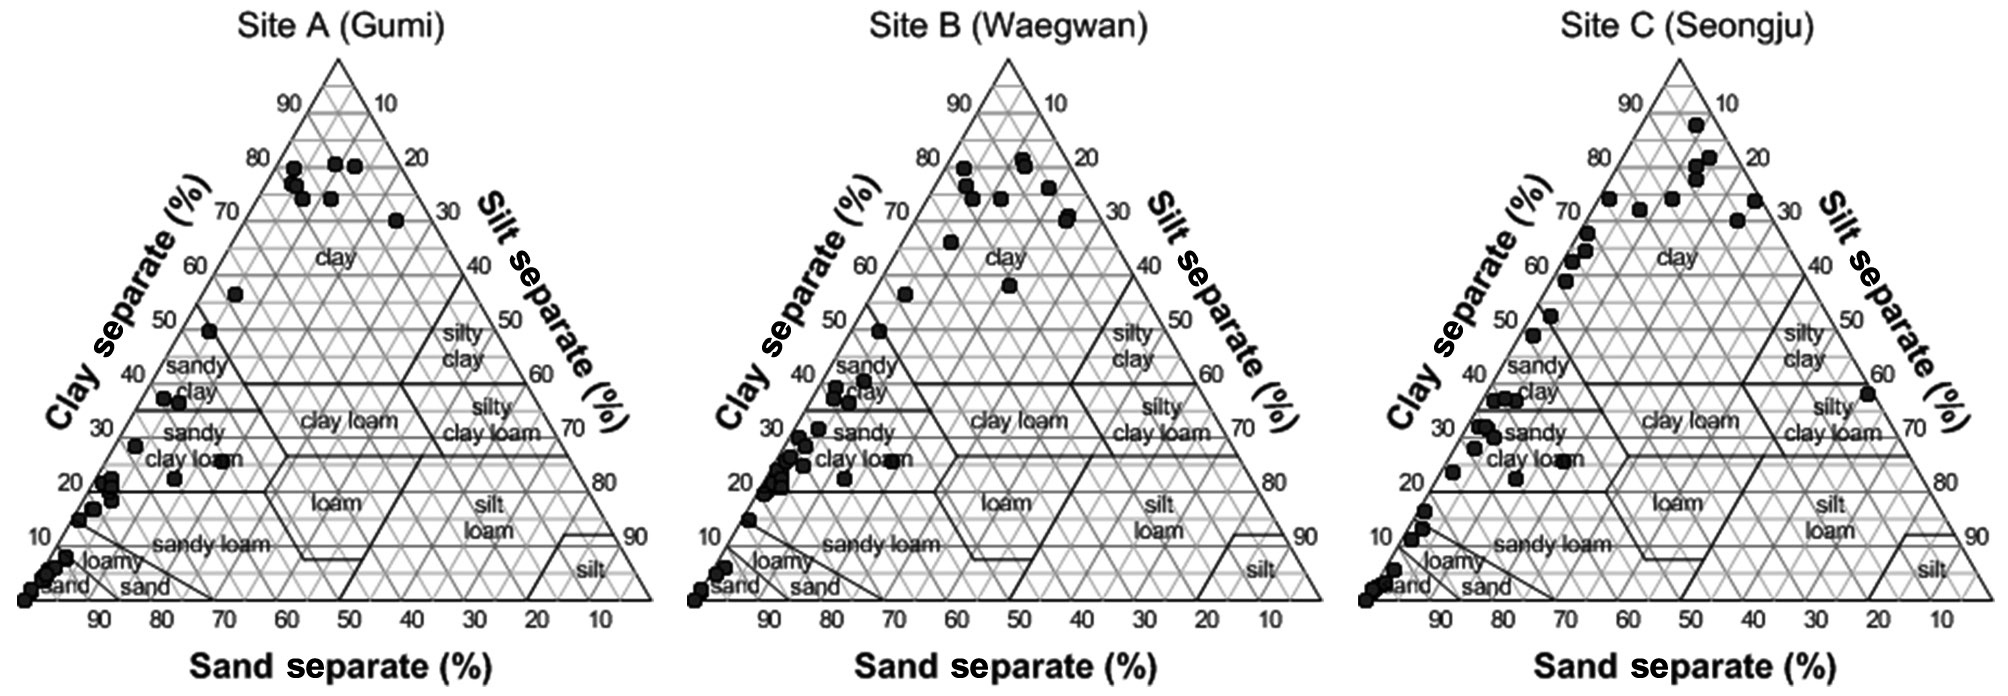 Textural classification of fluvial deposits at sites A, B, and C [25].